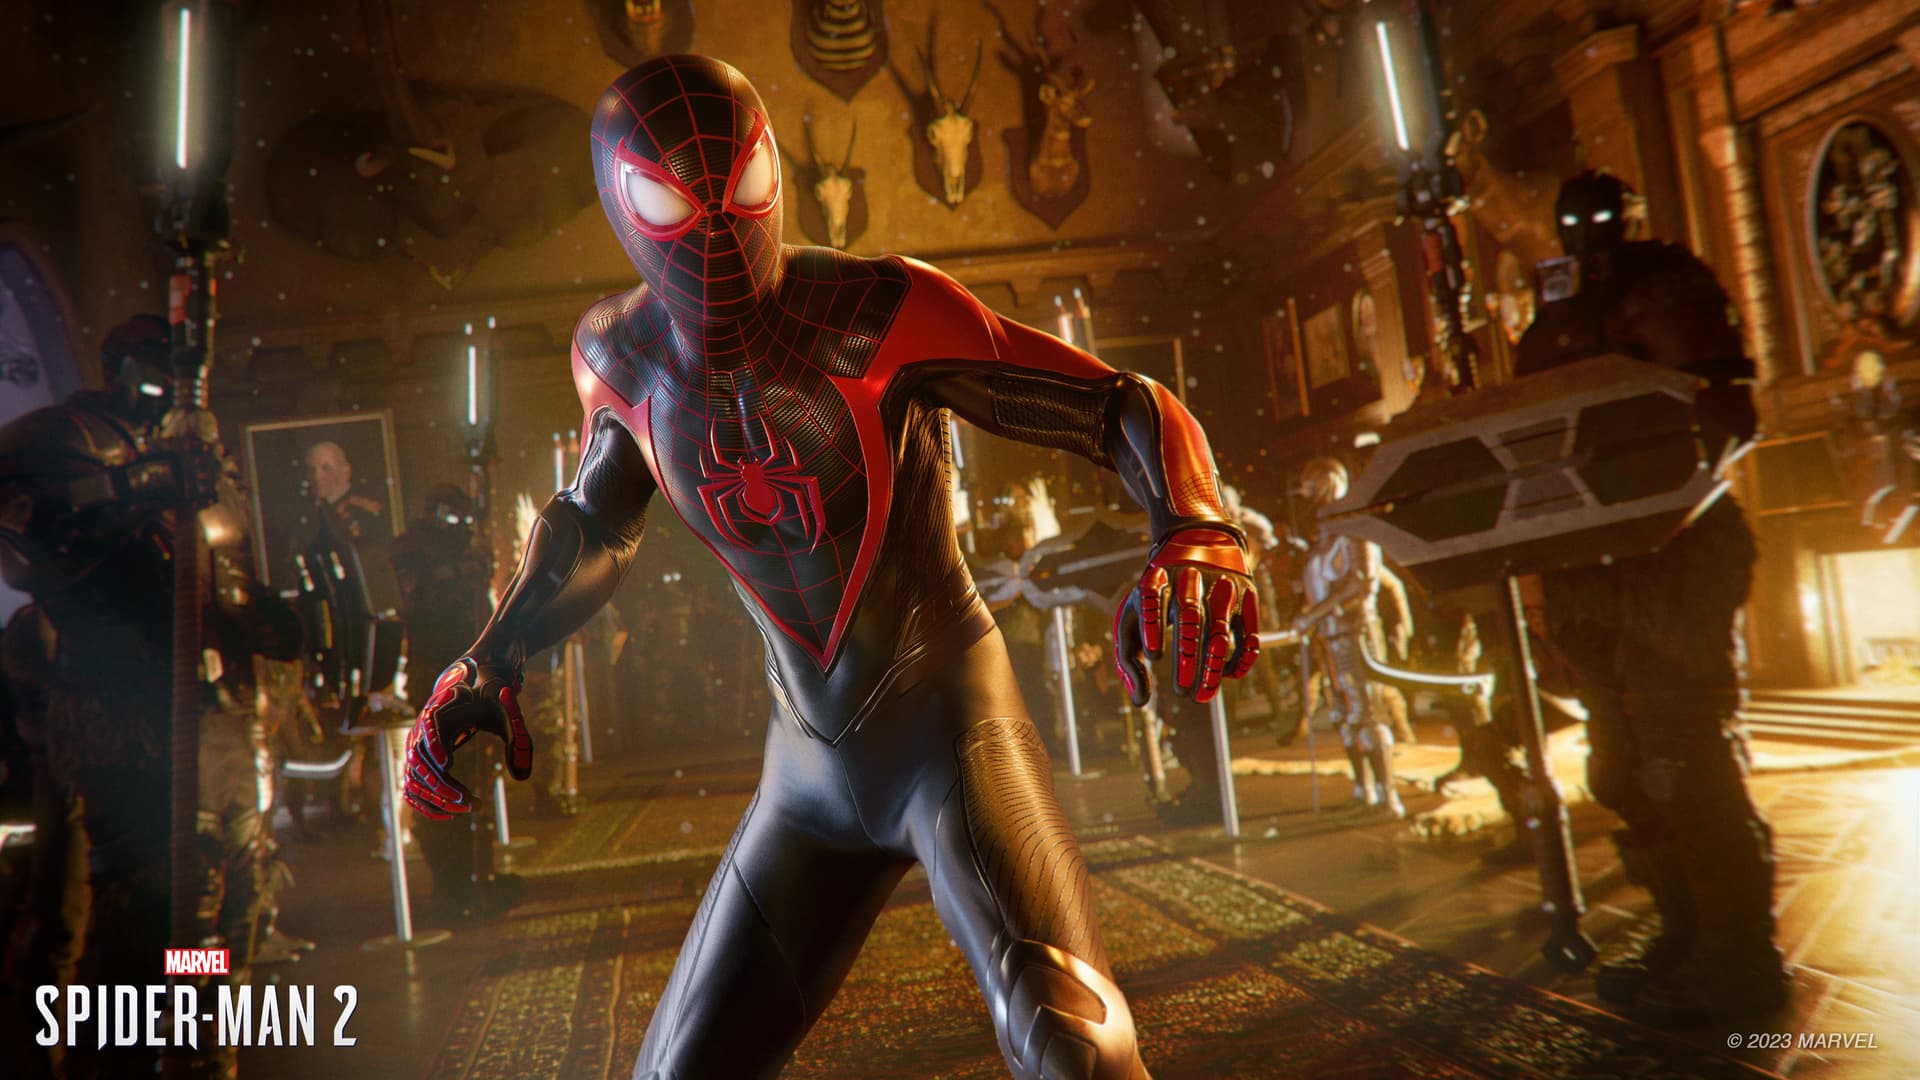 SDCC 2023: Marvel's Spider-Man 2 Showcases New Story Trailer at San Diego Comic-Con 2023